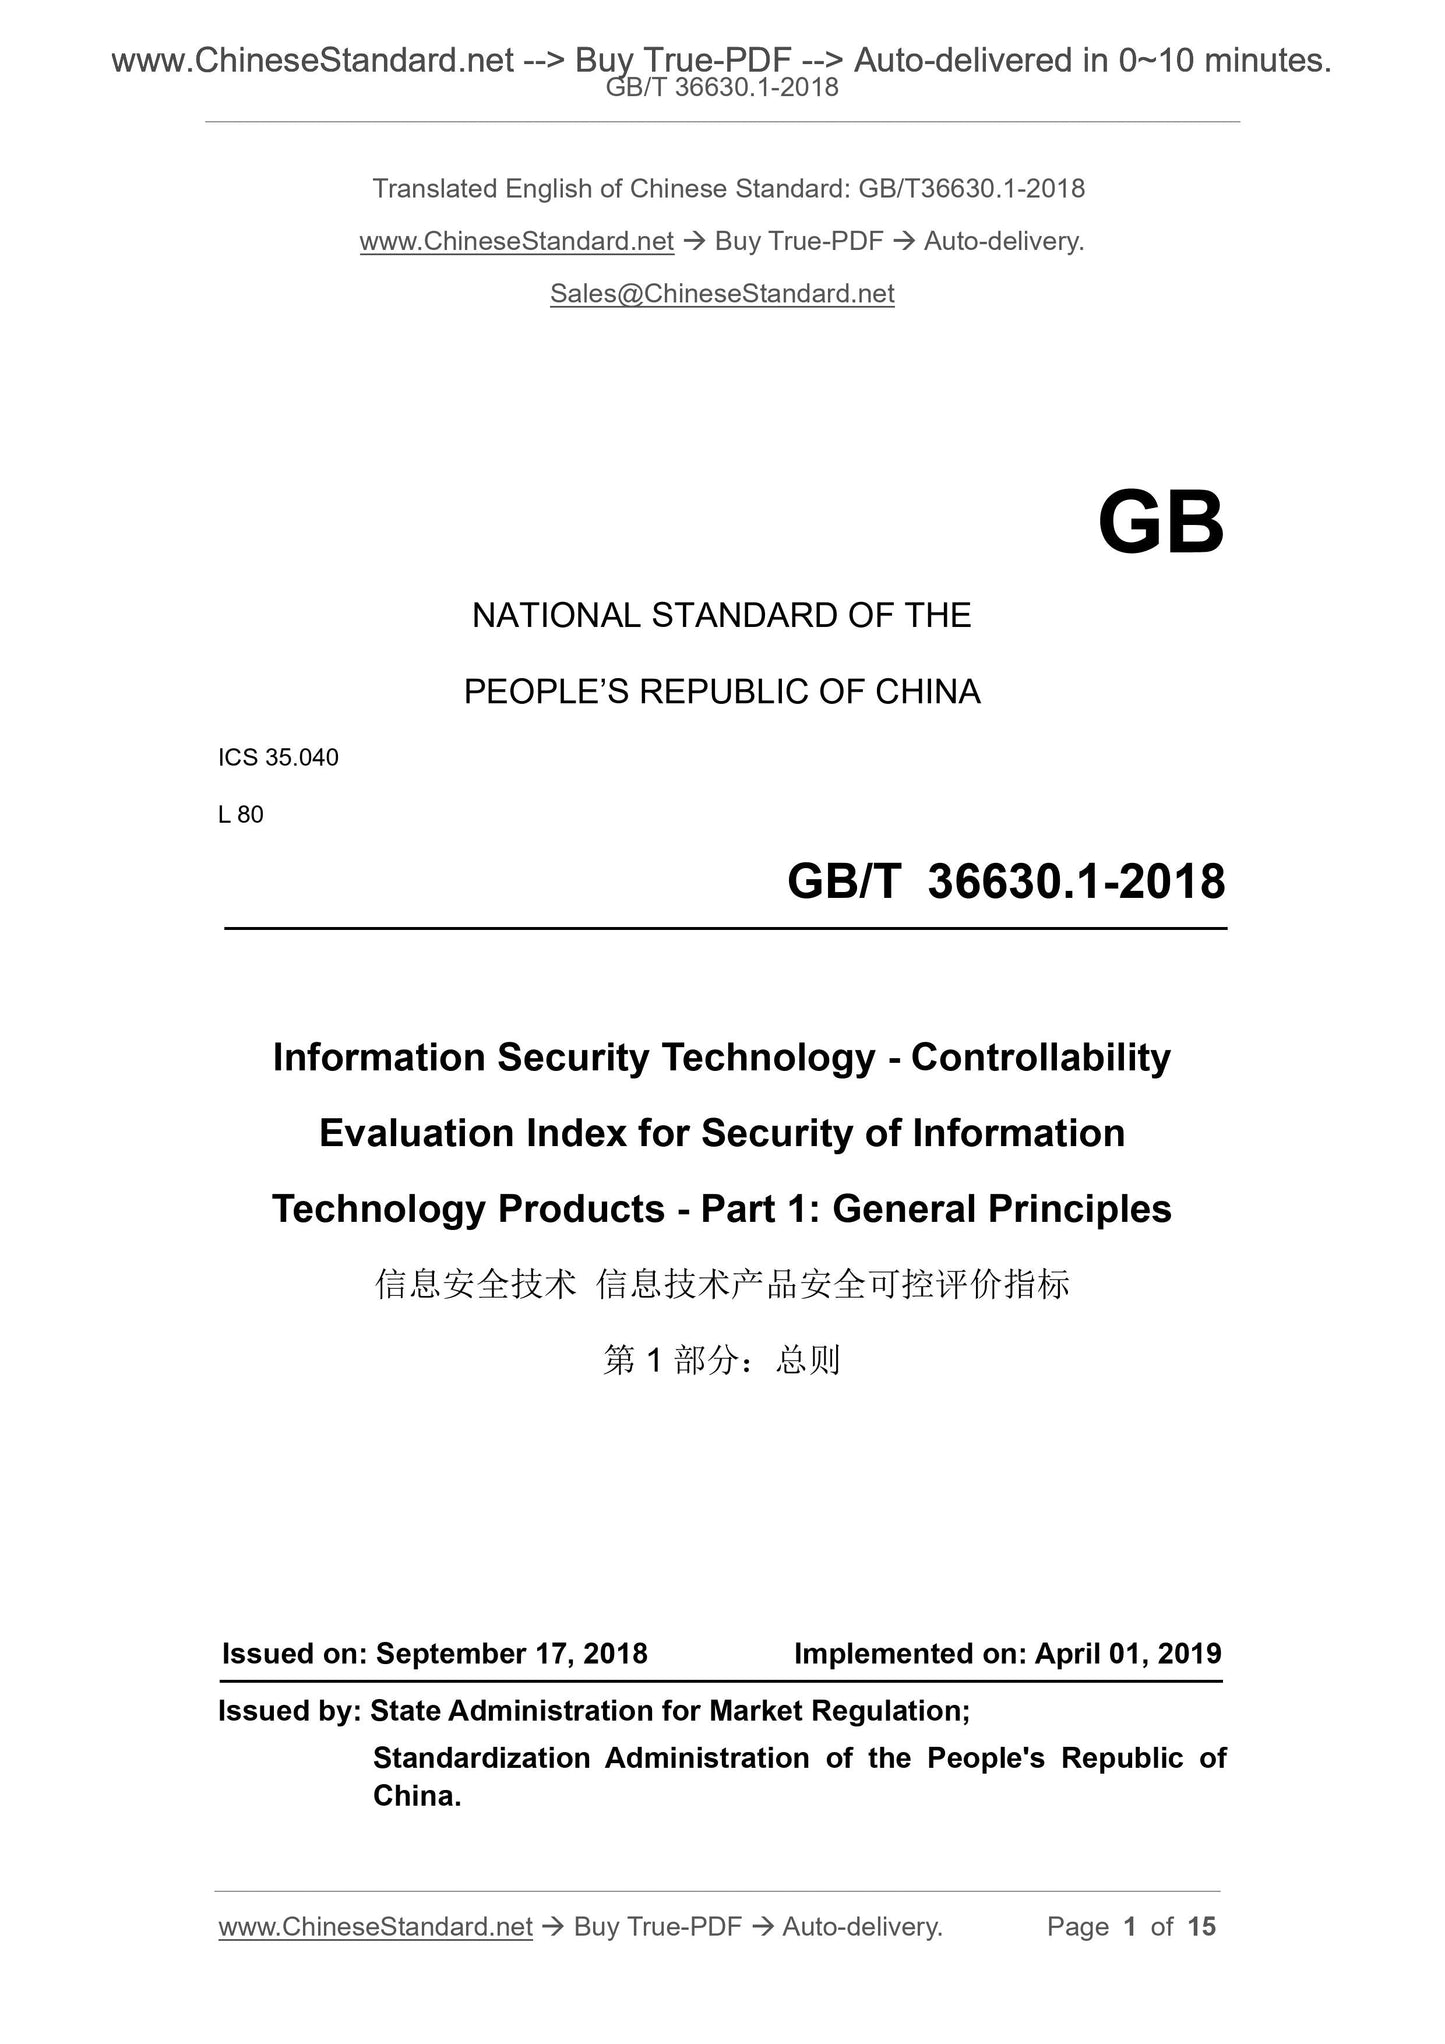 GB/T 36630.1-2018 Page 1